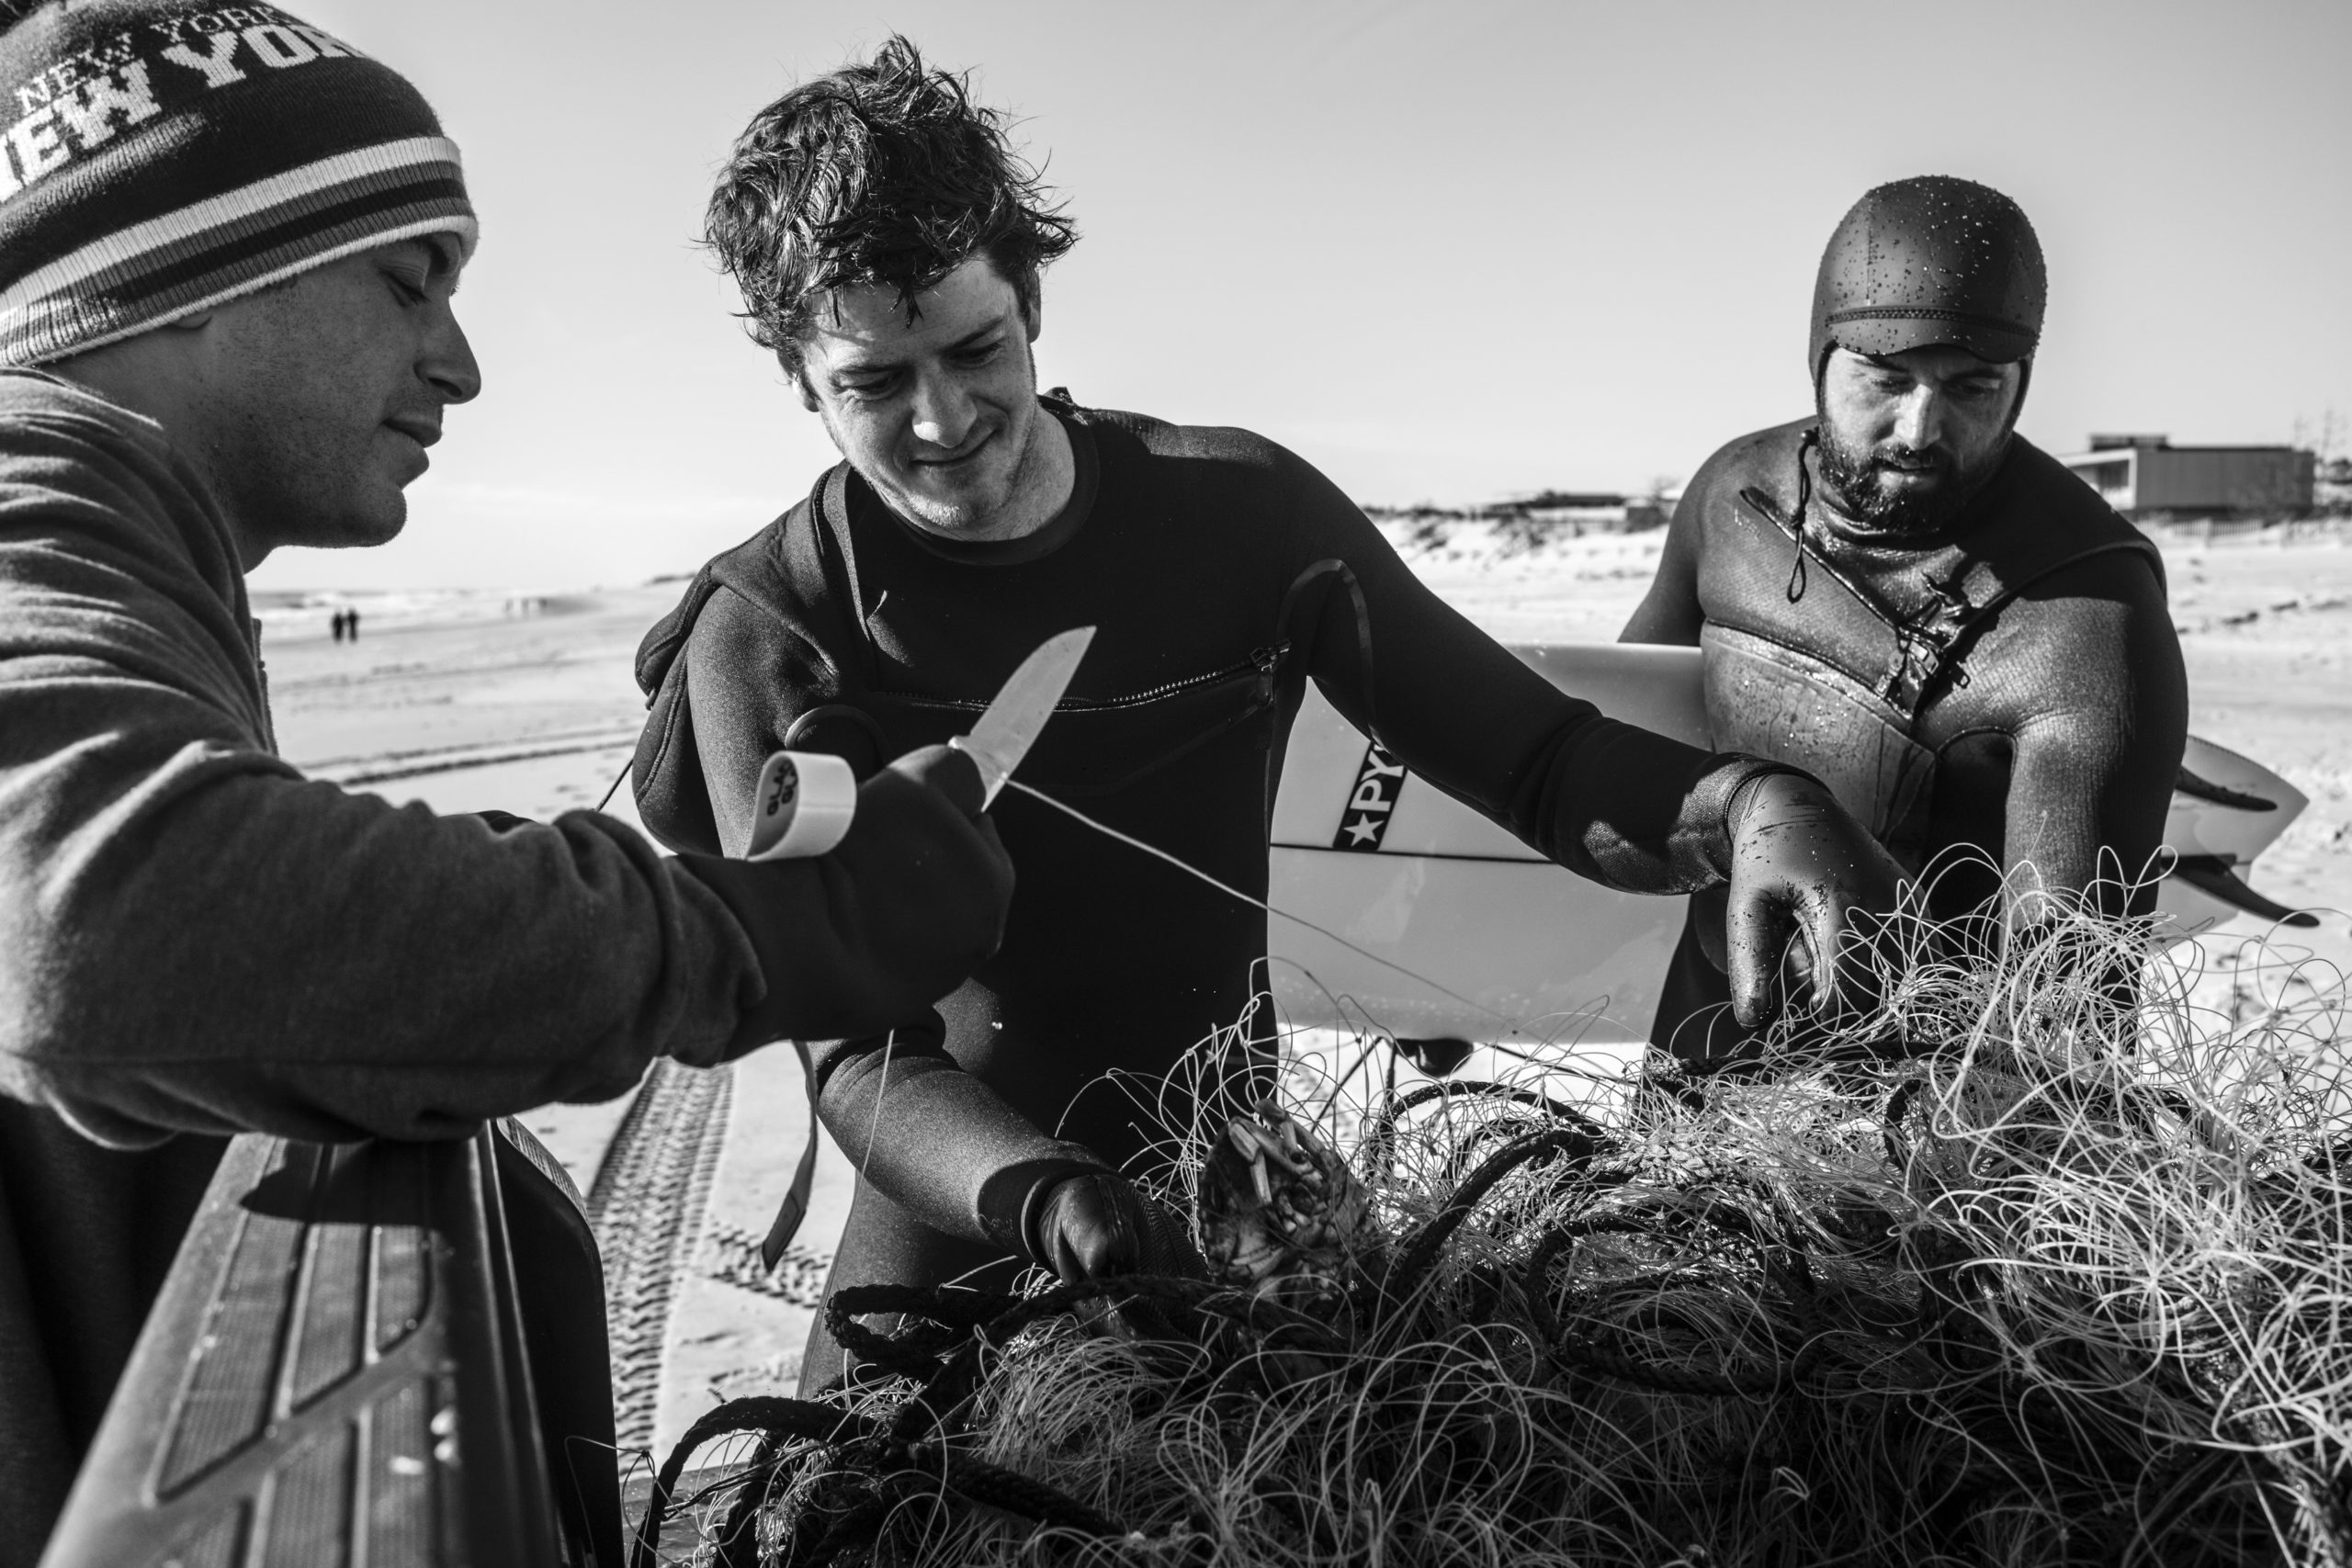 Local surfers, Brian Pollak, Will O’Connor, and Marley Doherty, untangle Peekytoe Crabs from an old fishing line that washed up on shore in Southampton on Sunday, December 27.     LORI HAWKINS